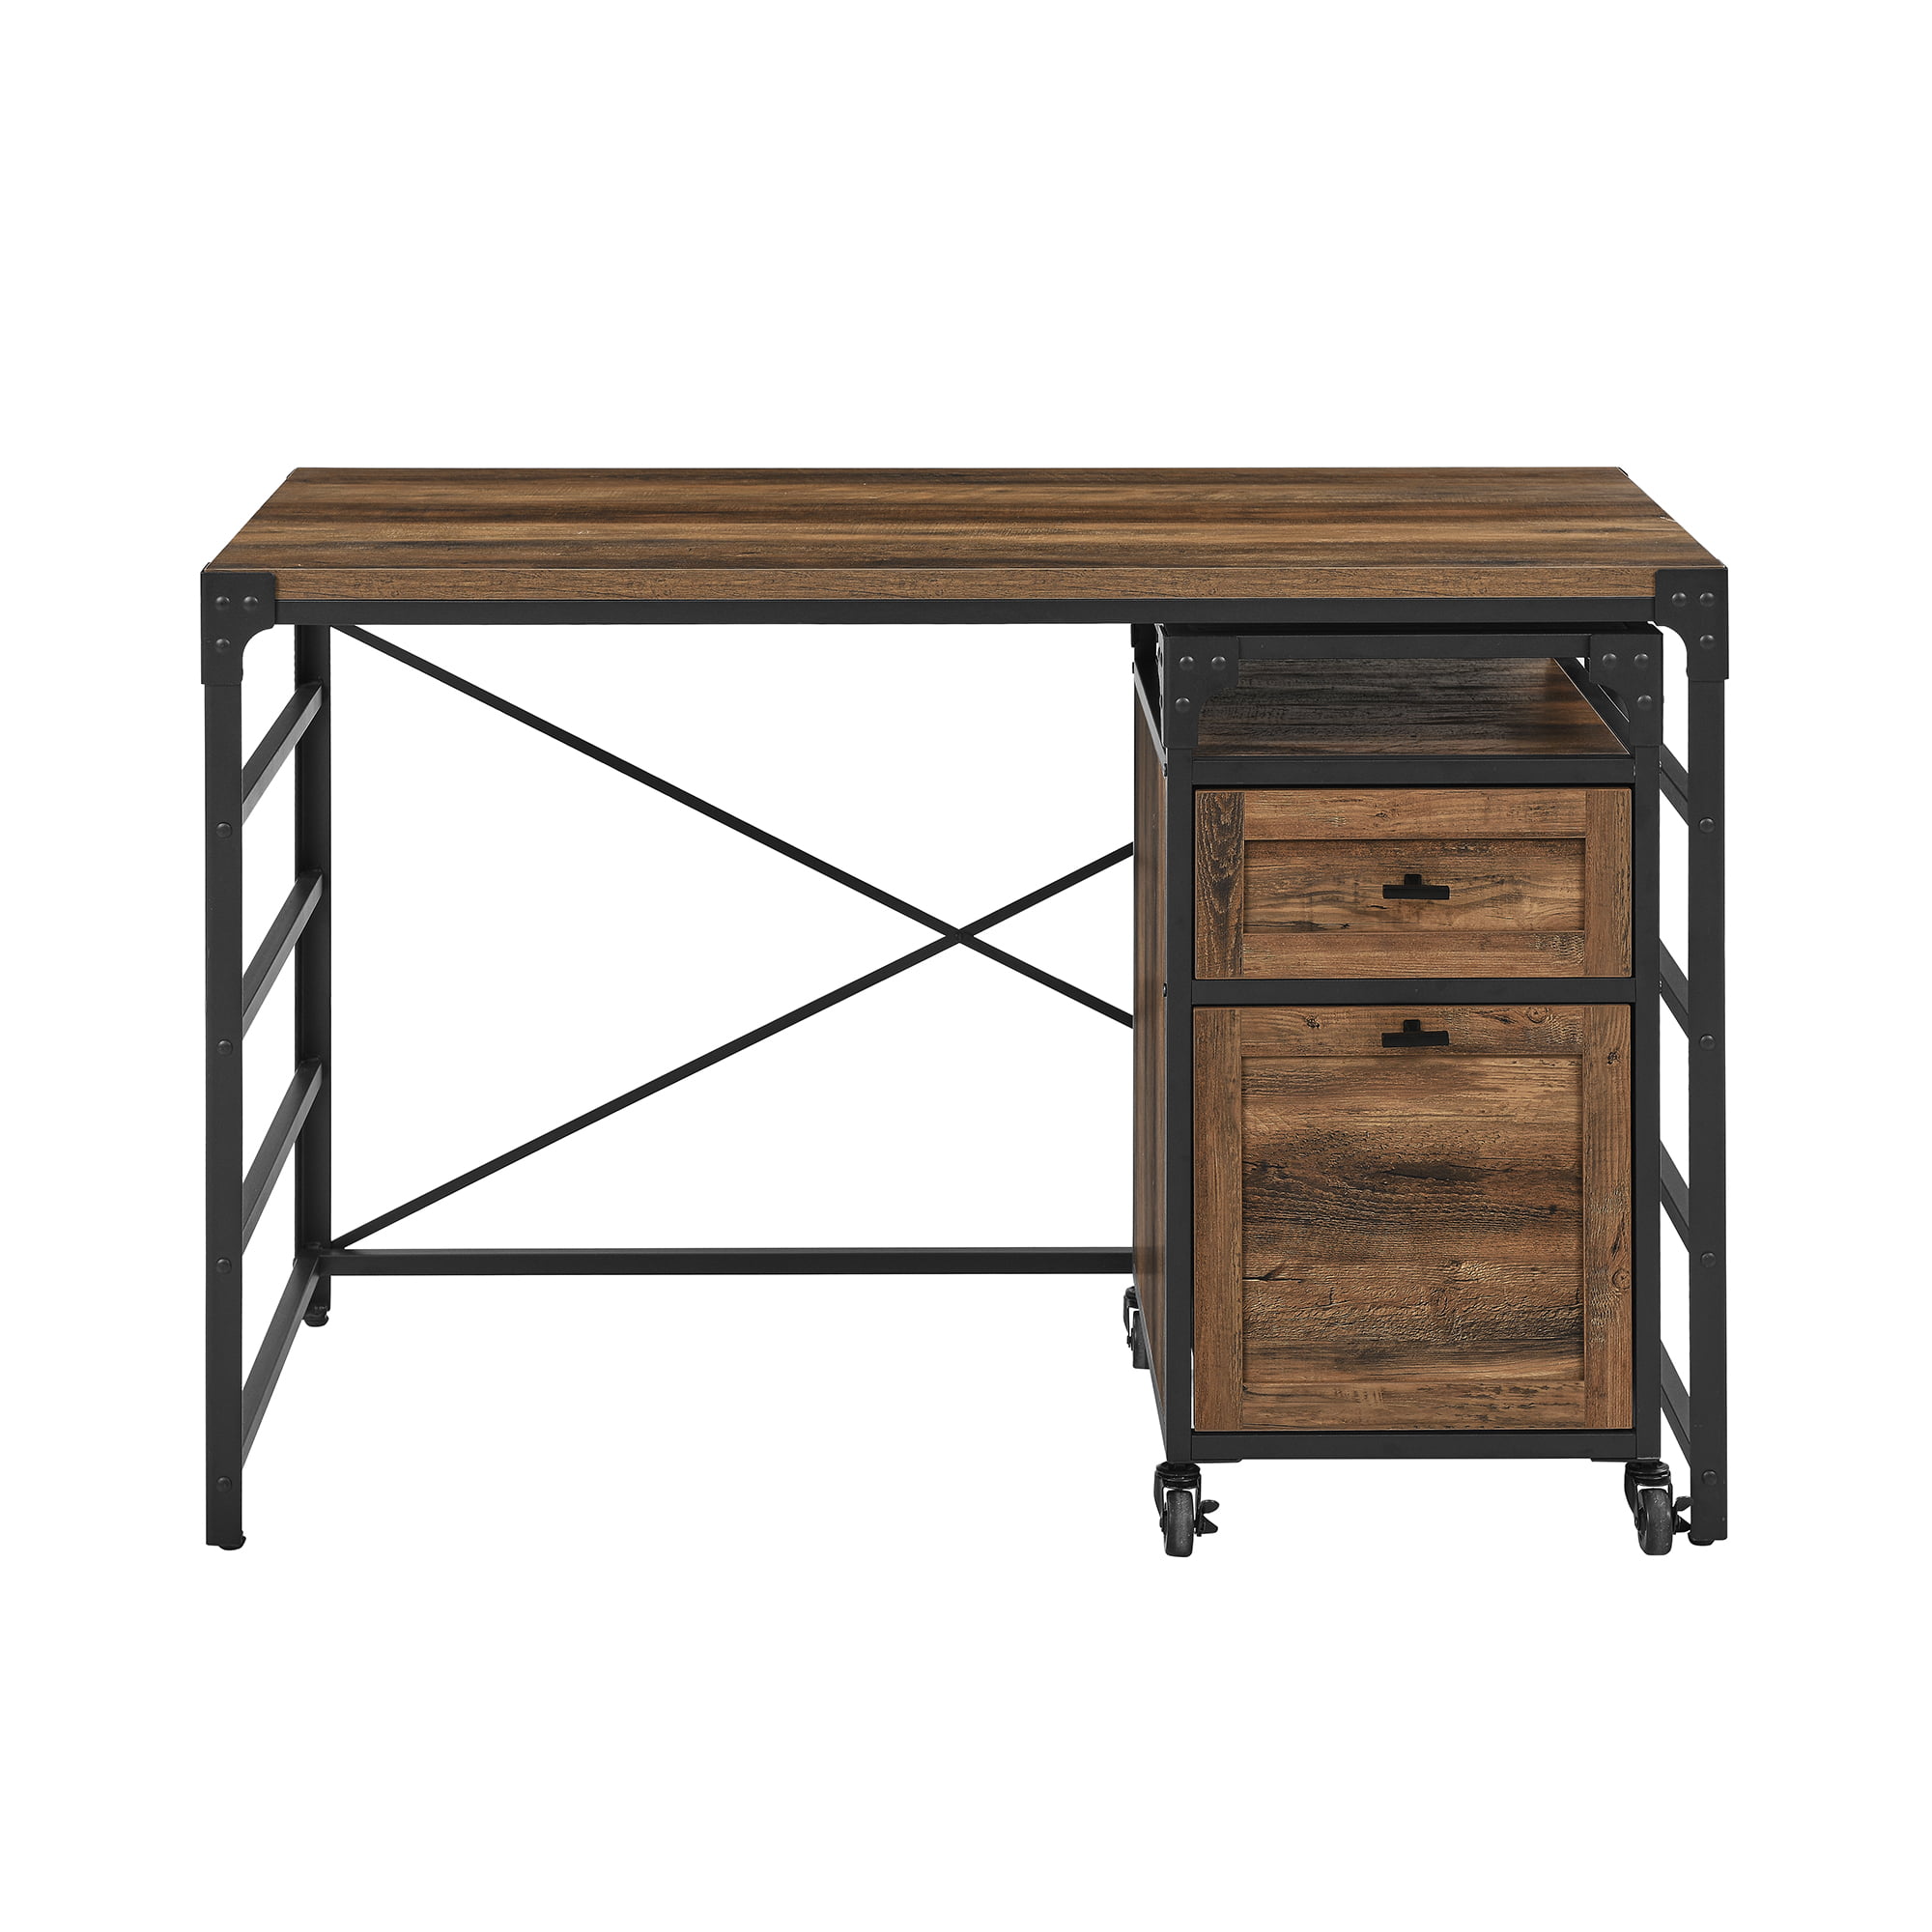 Malani 4 Drawer Solid Wood Desk Foundry Select Color: Unfinished